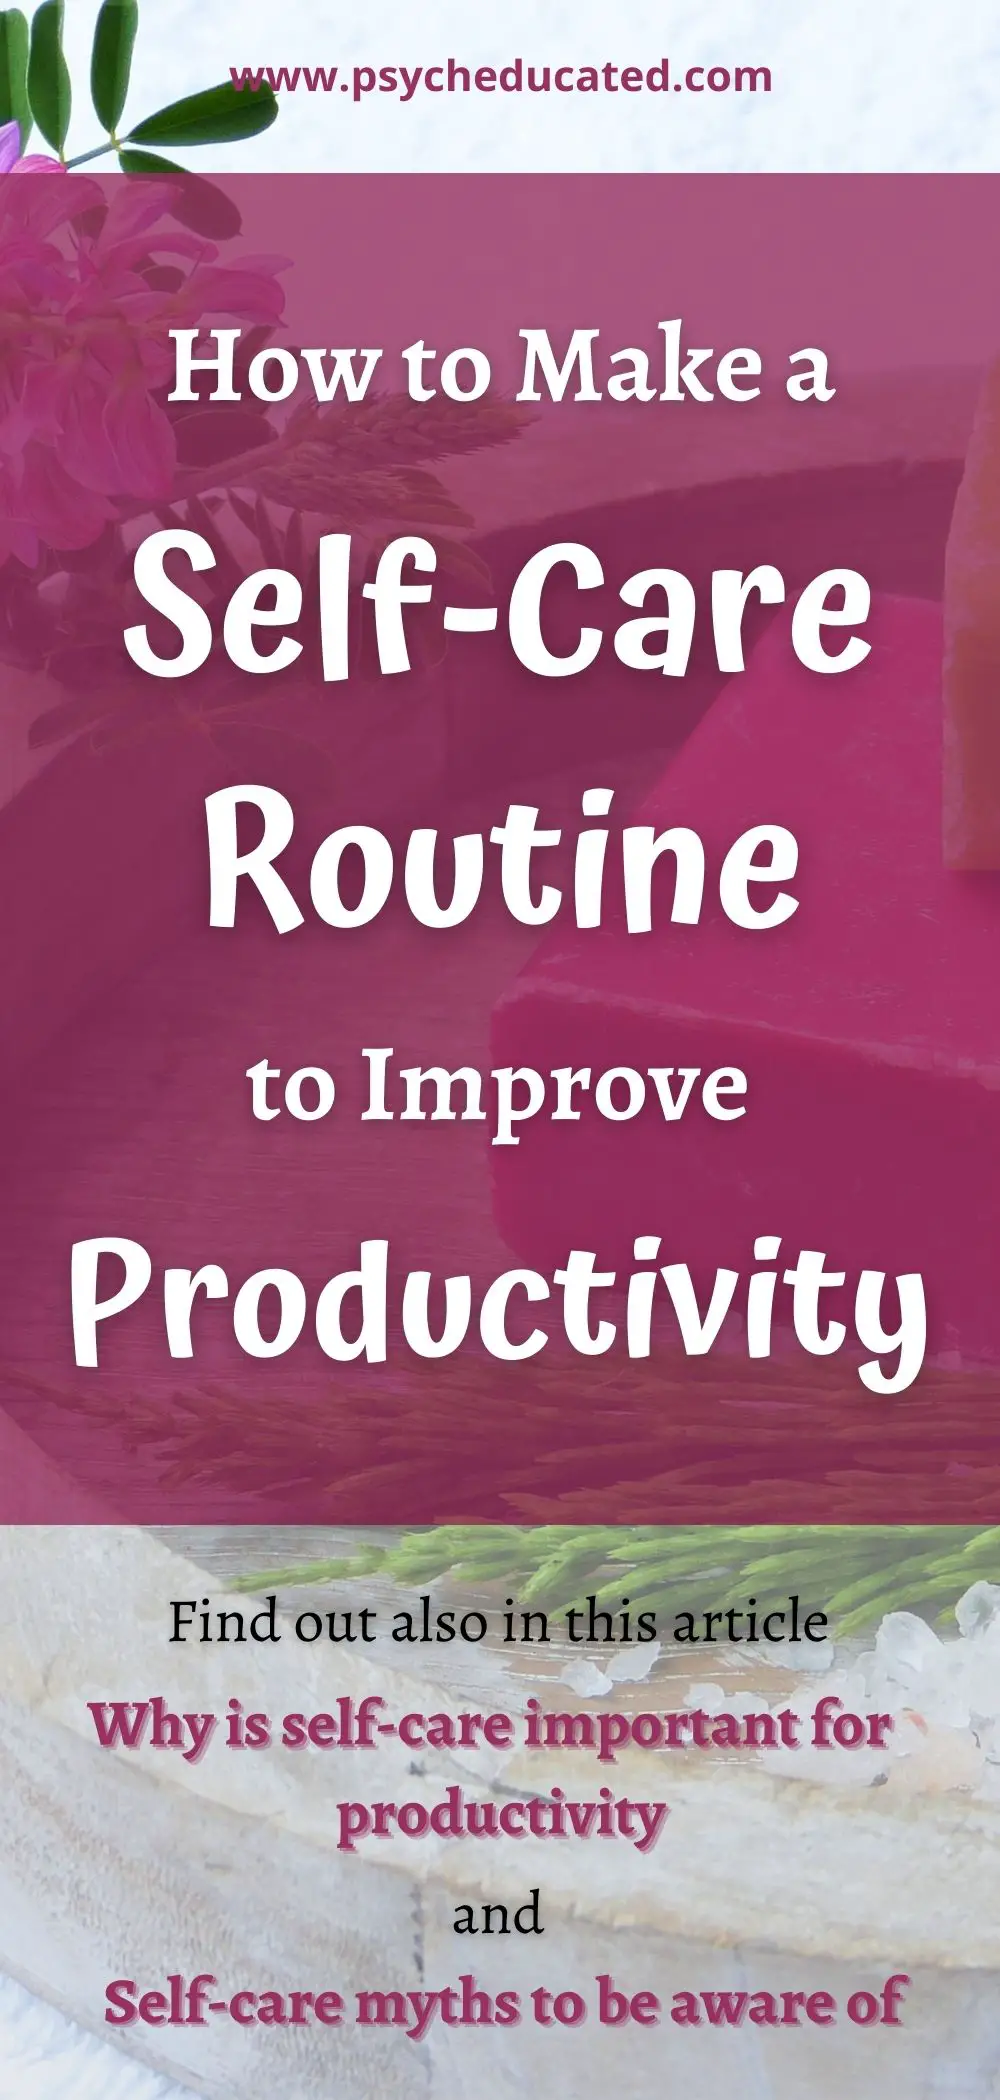 How to make a self-care routine to improve productivity